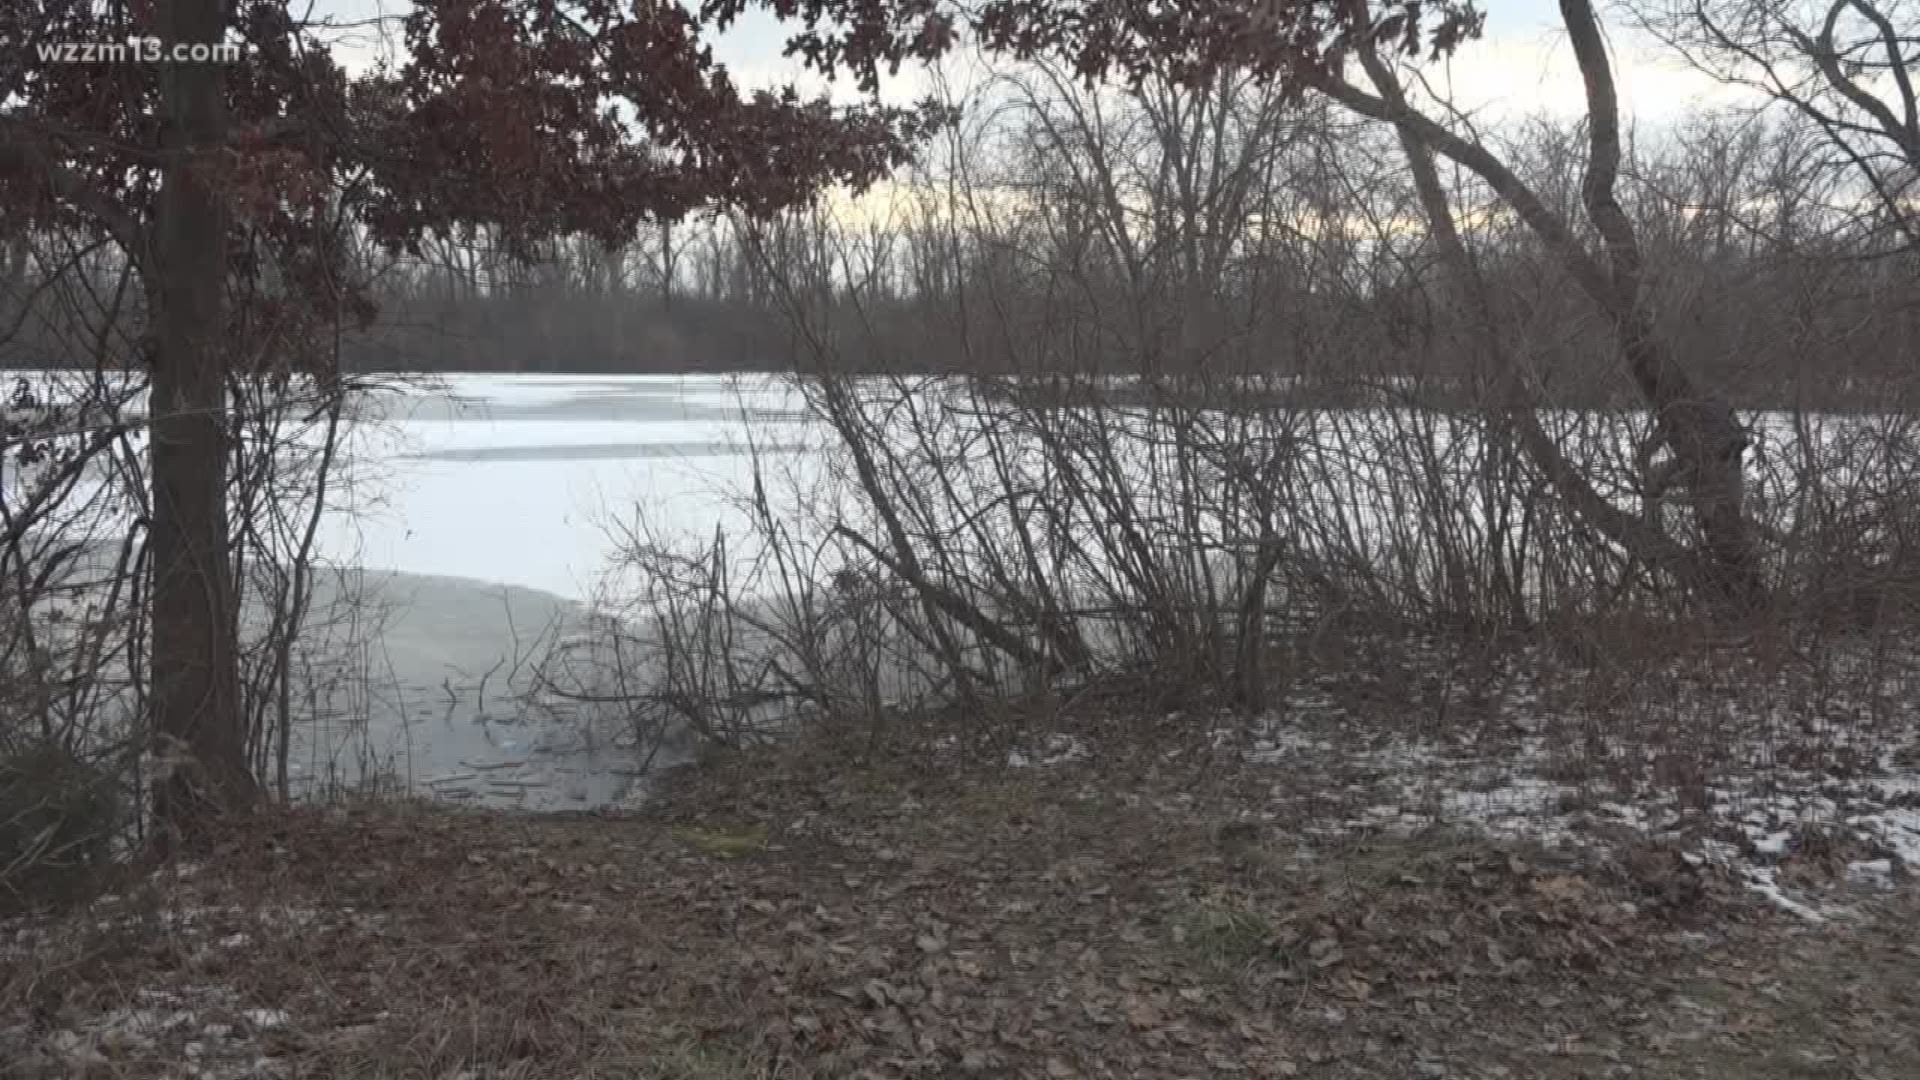 Woman drowns in pond trying to save her dog